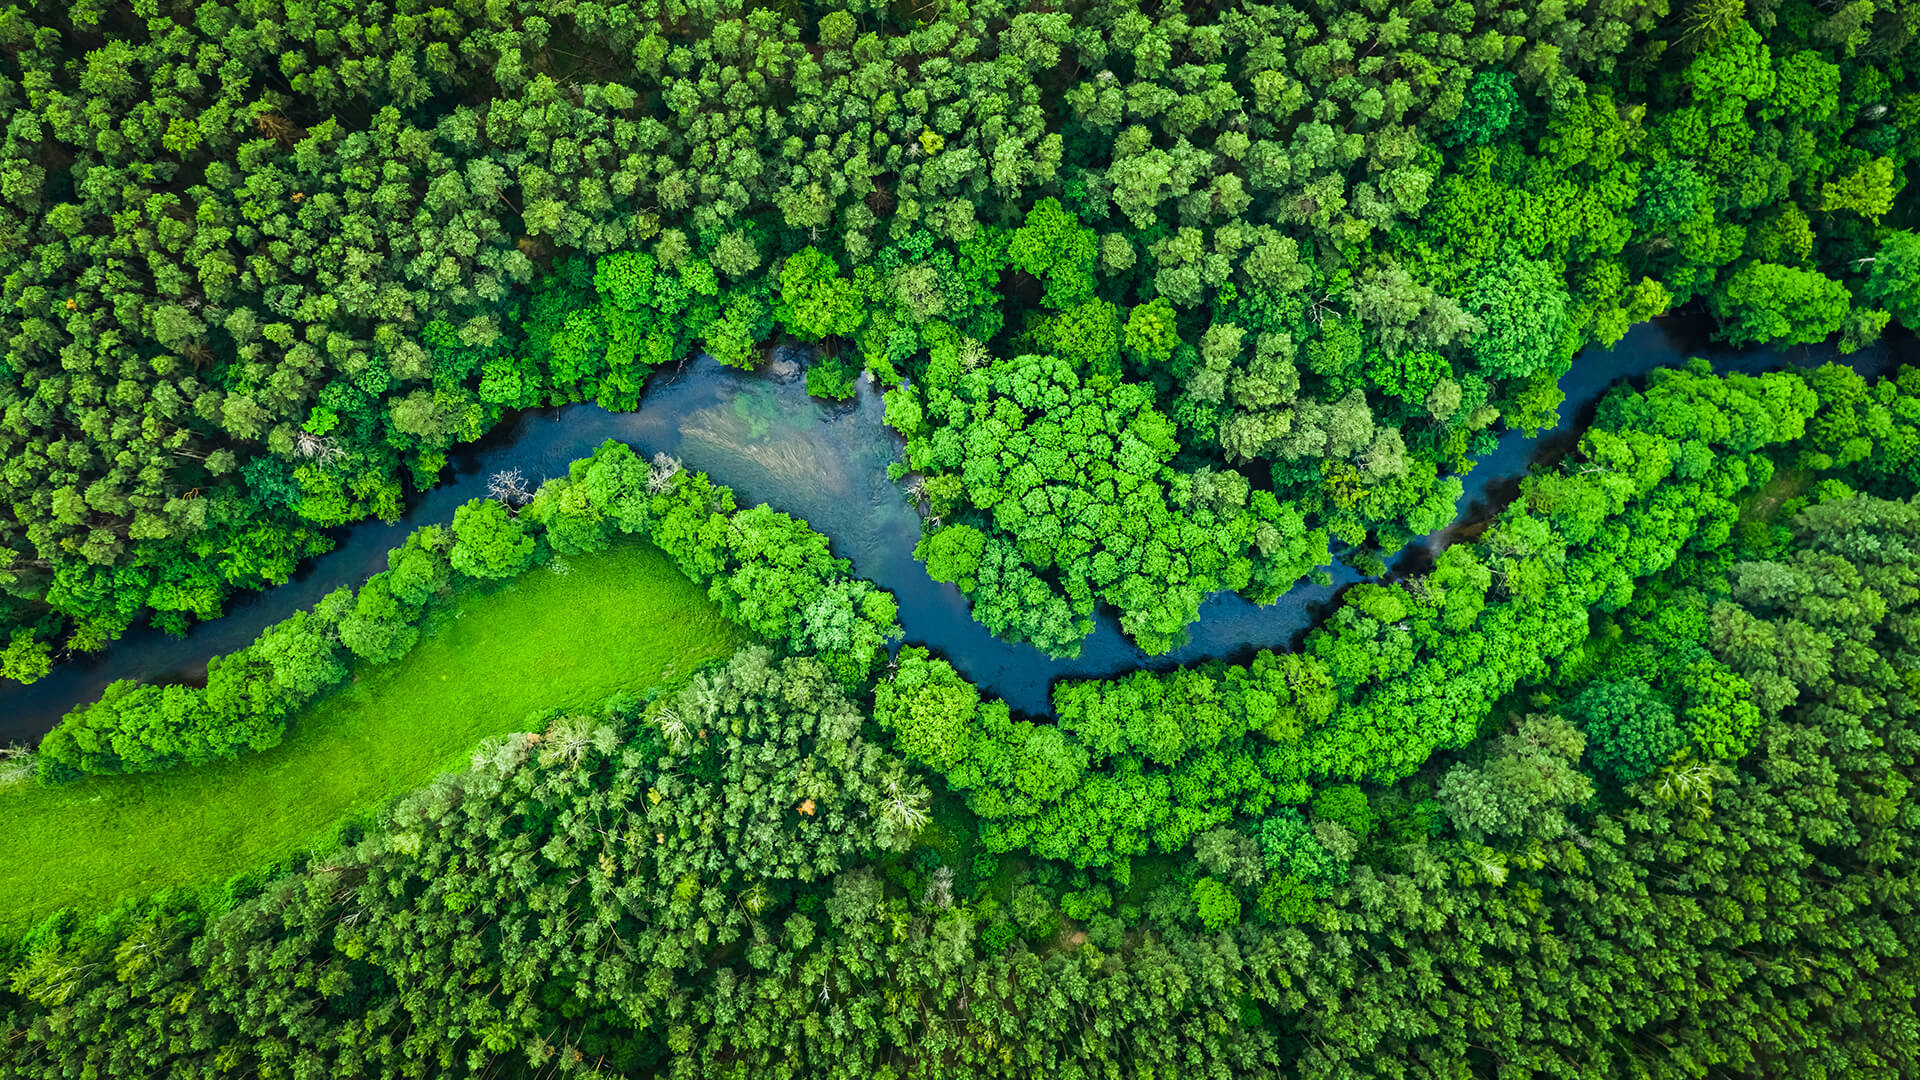 River meanders through green forest